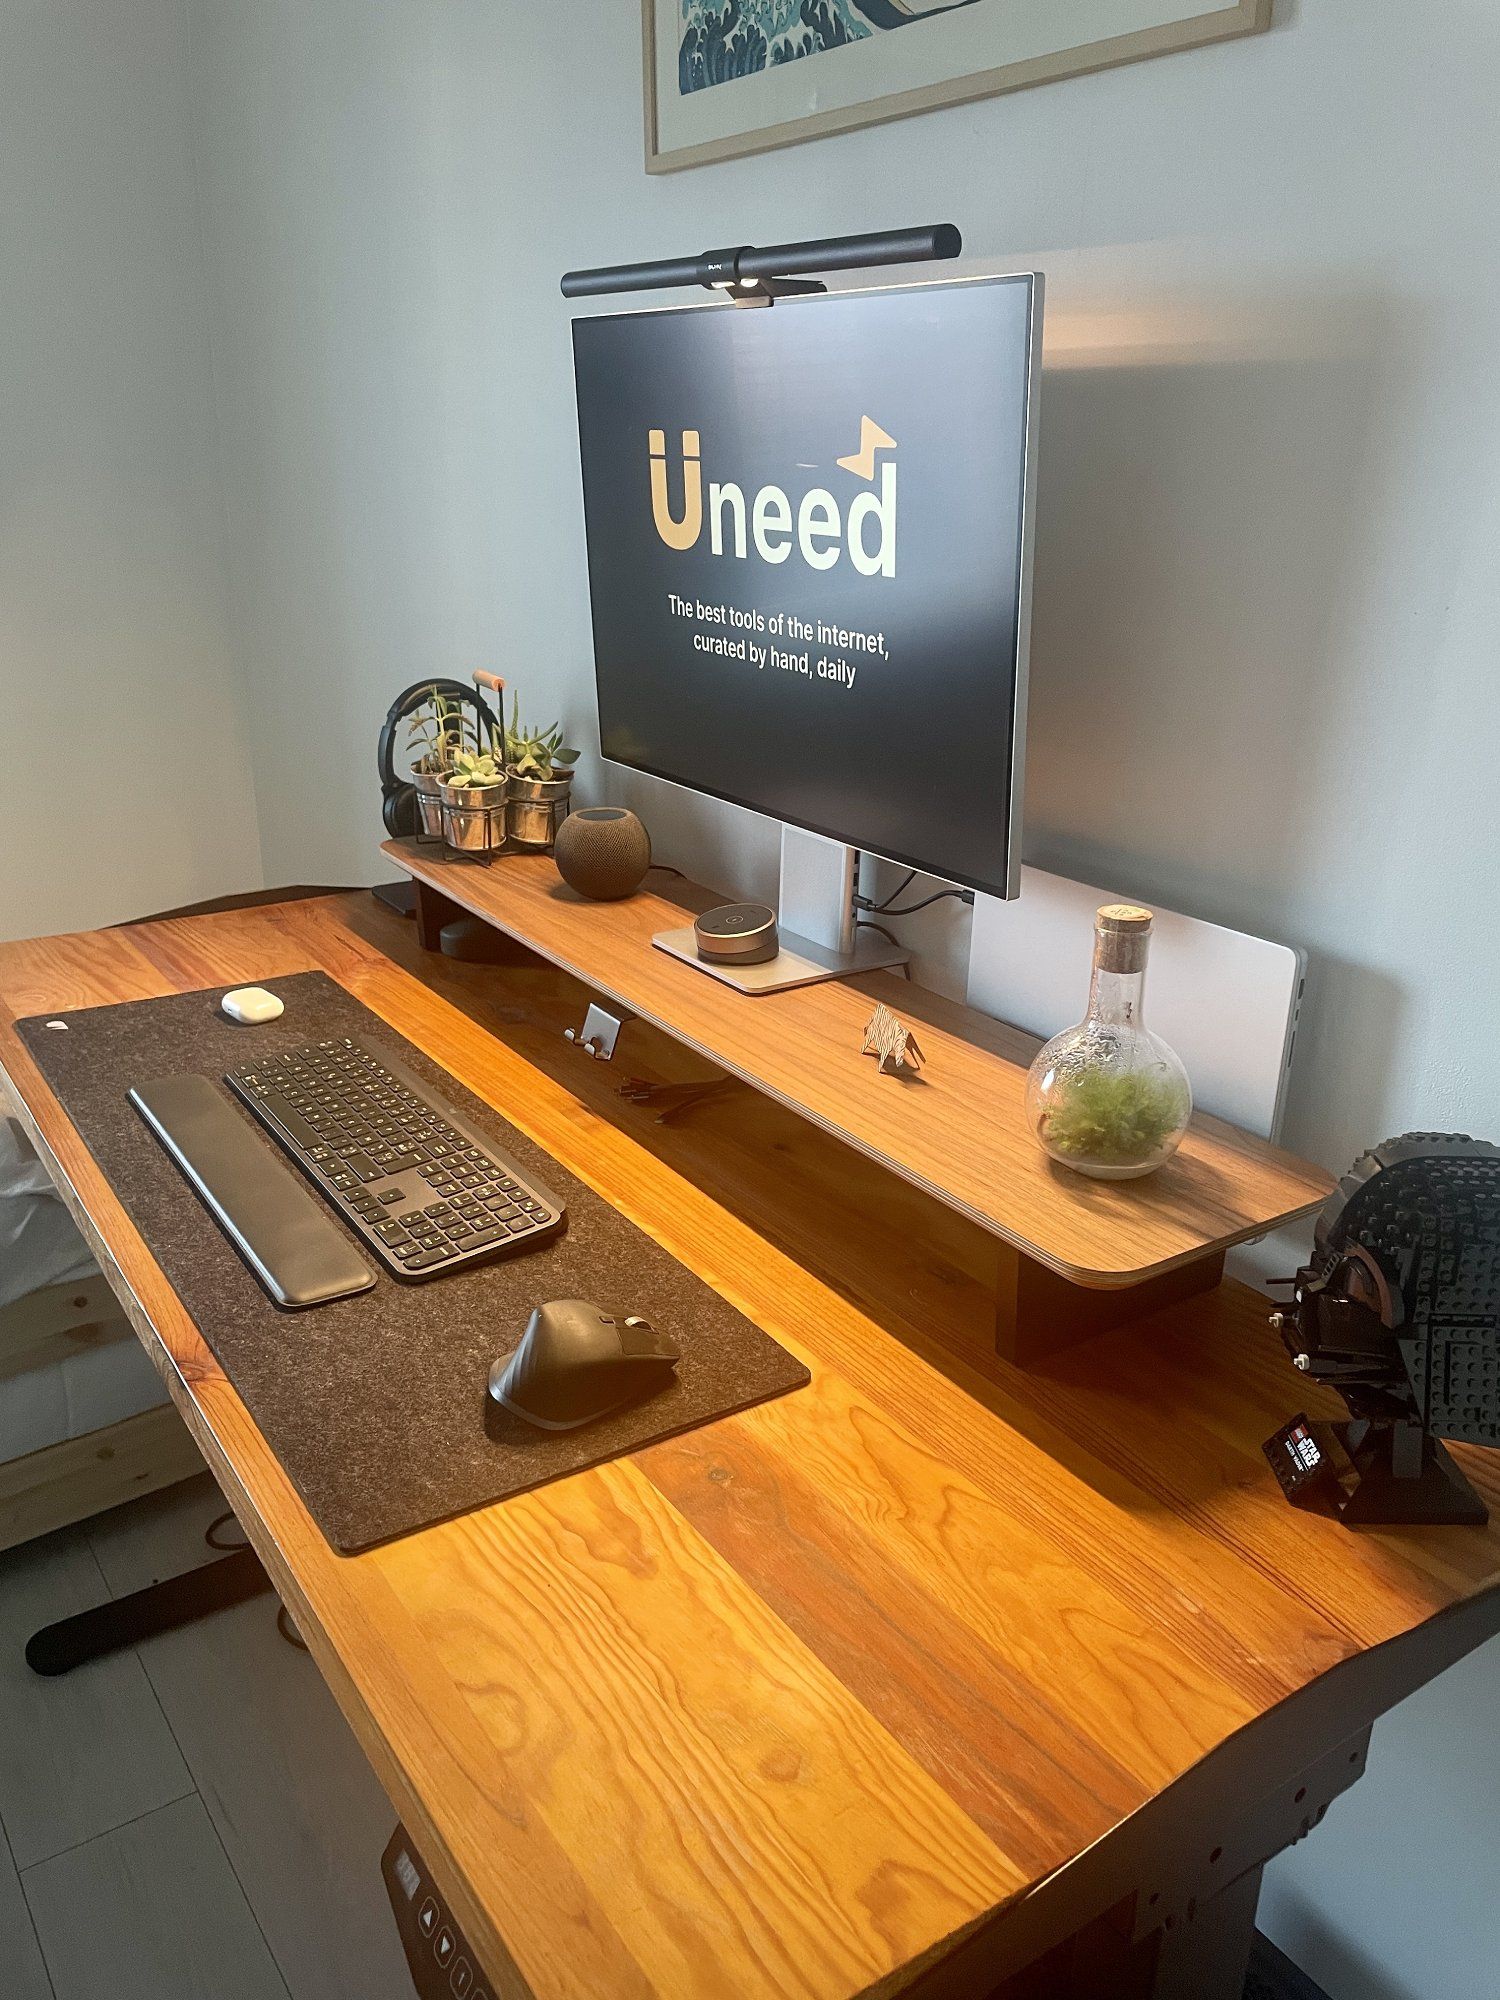 A modern and minimalist workspace featuring a wooden standing desk with a sleek ultra-wide monitor, small potted plants, and various neatly organised stationery items